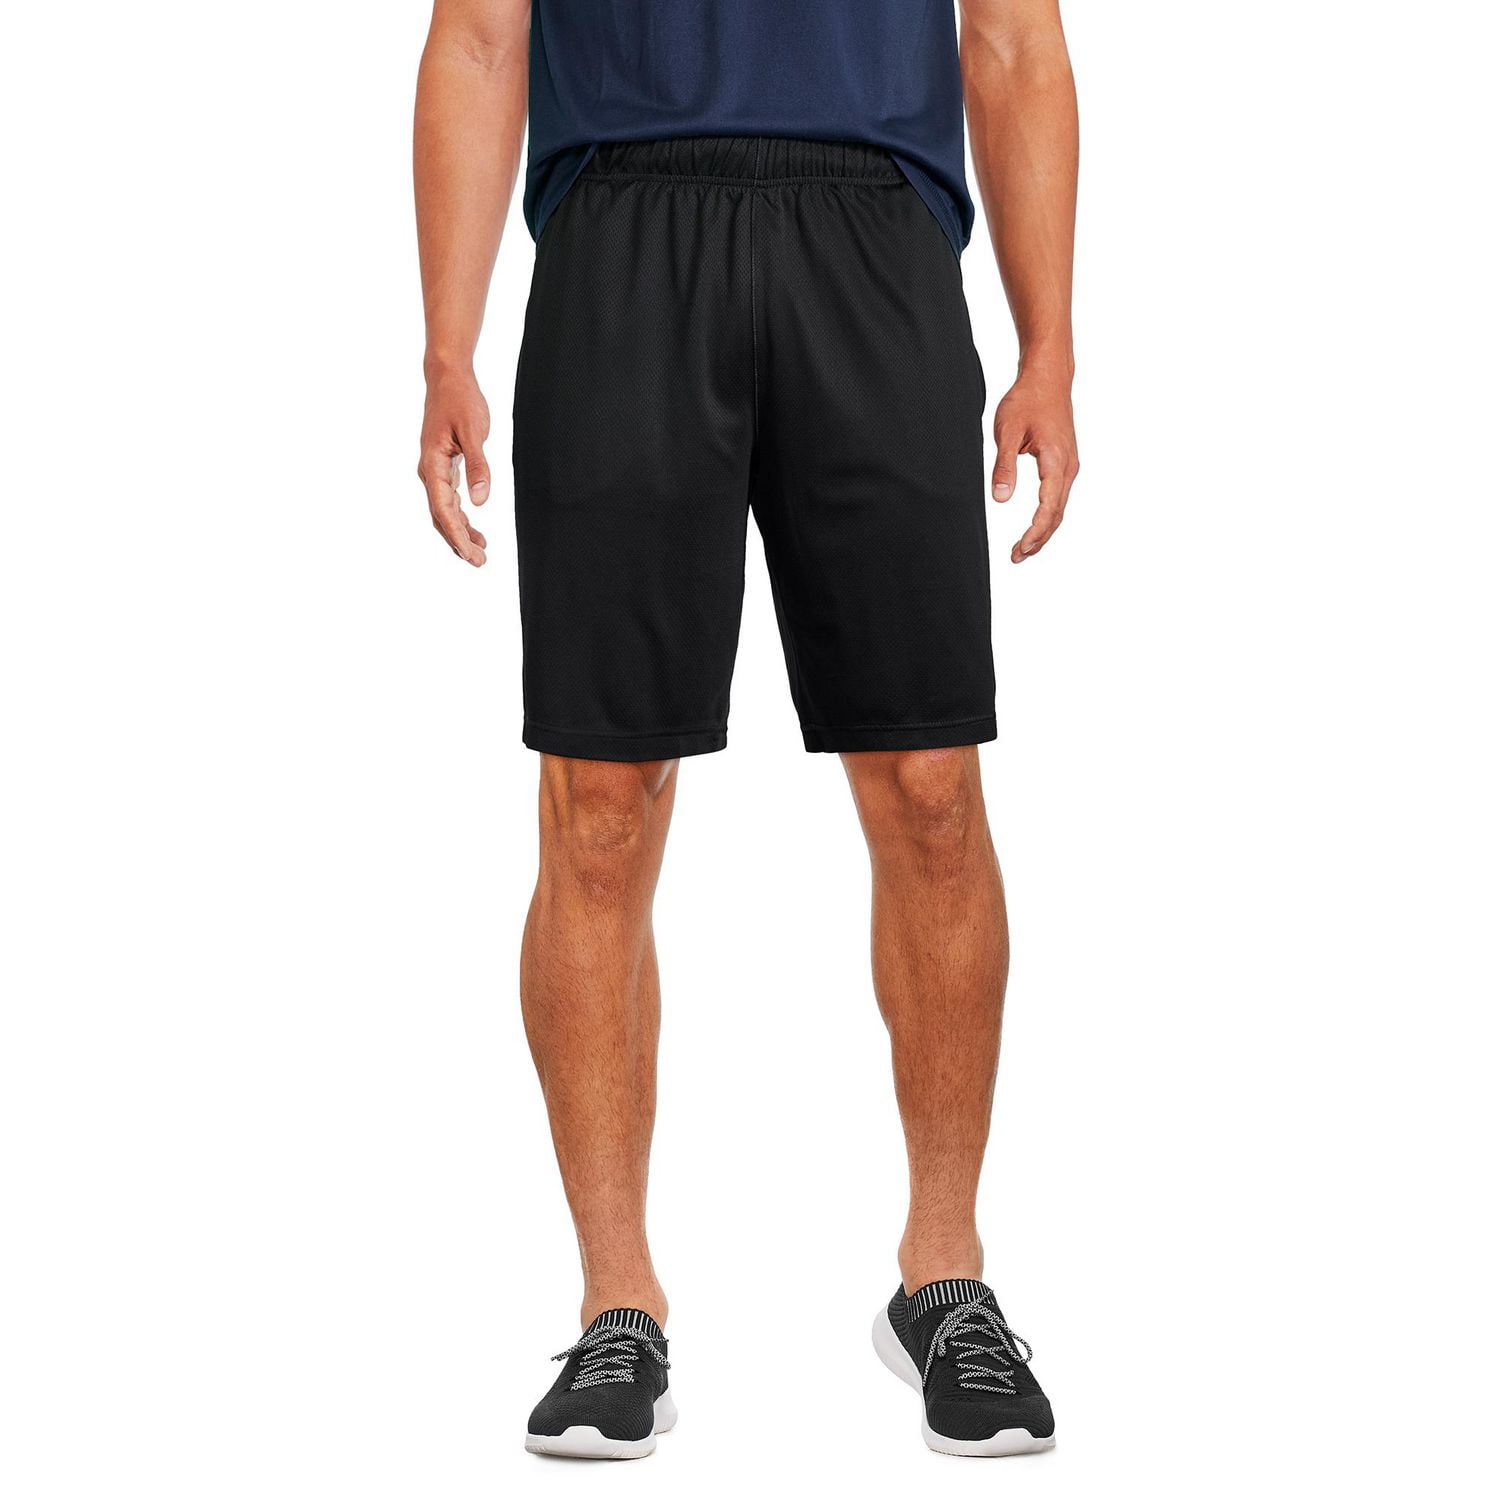 Balance Collection Black Athletic Shorts Size XL - 55% off